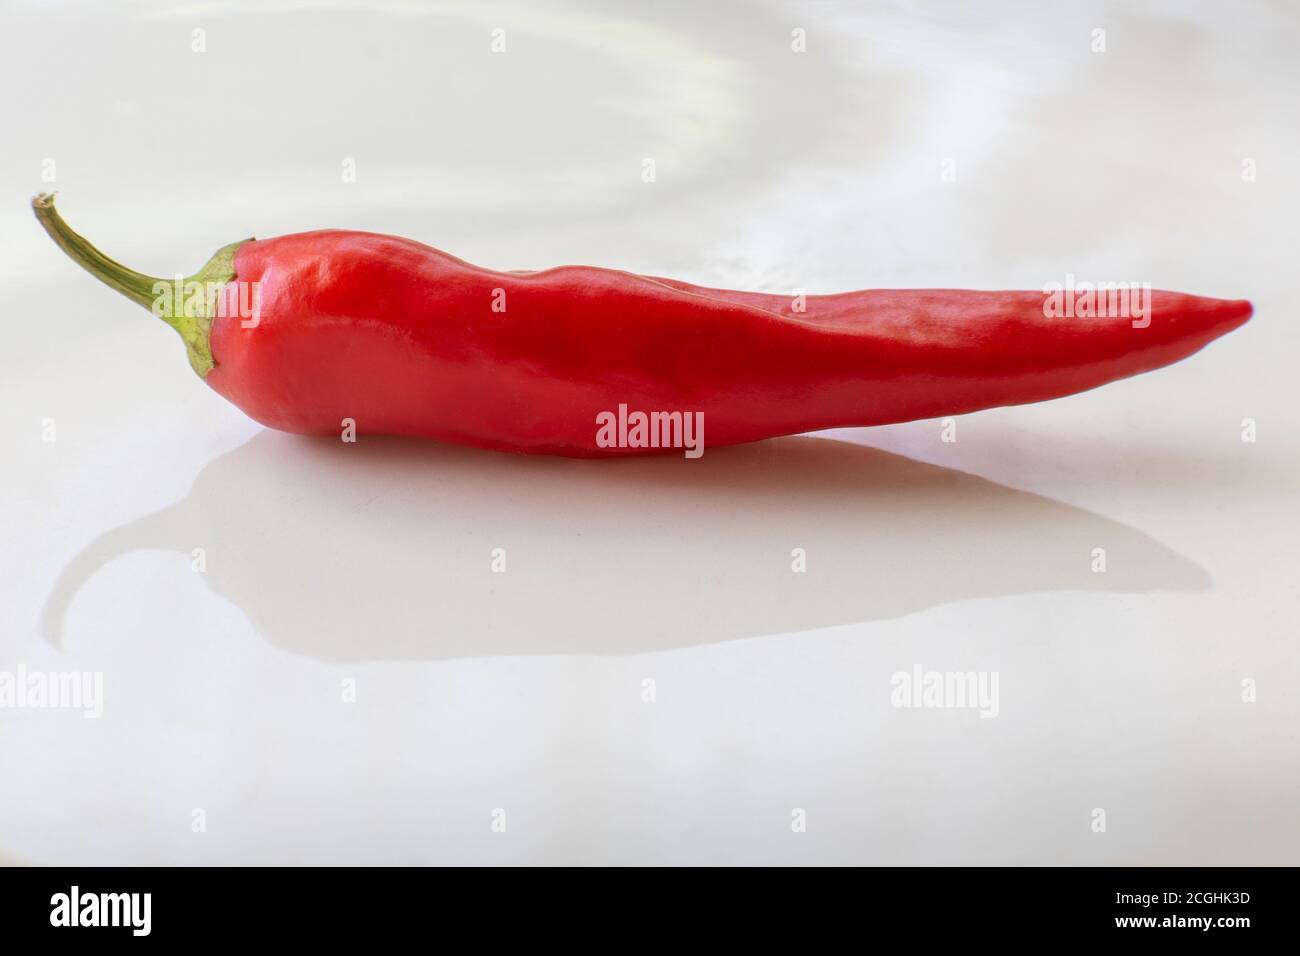 Sweet red bell pepper – capsicum annuum – drying on a plate in preparation for freezing. Stock Photo